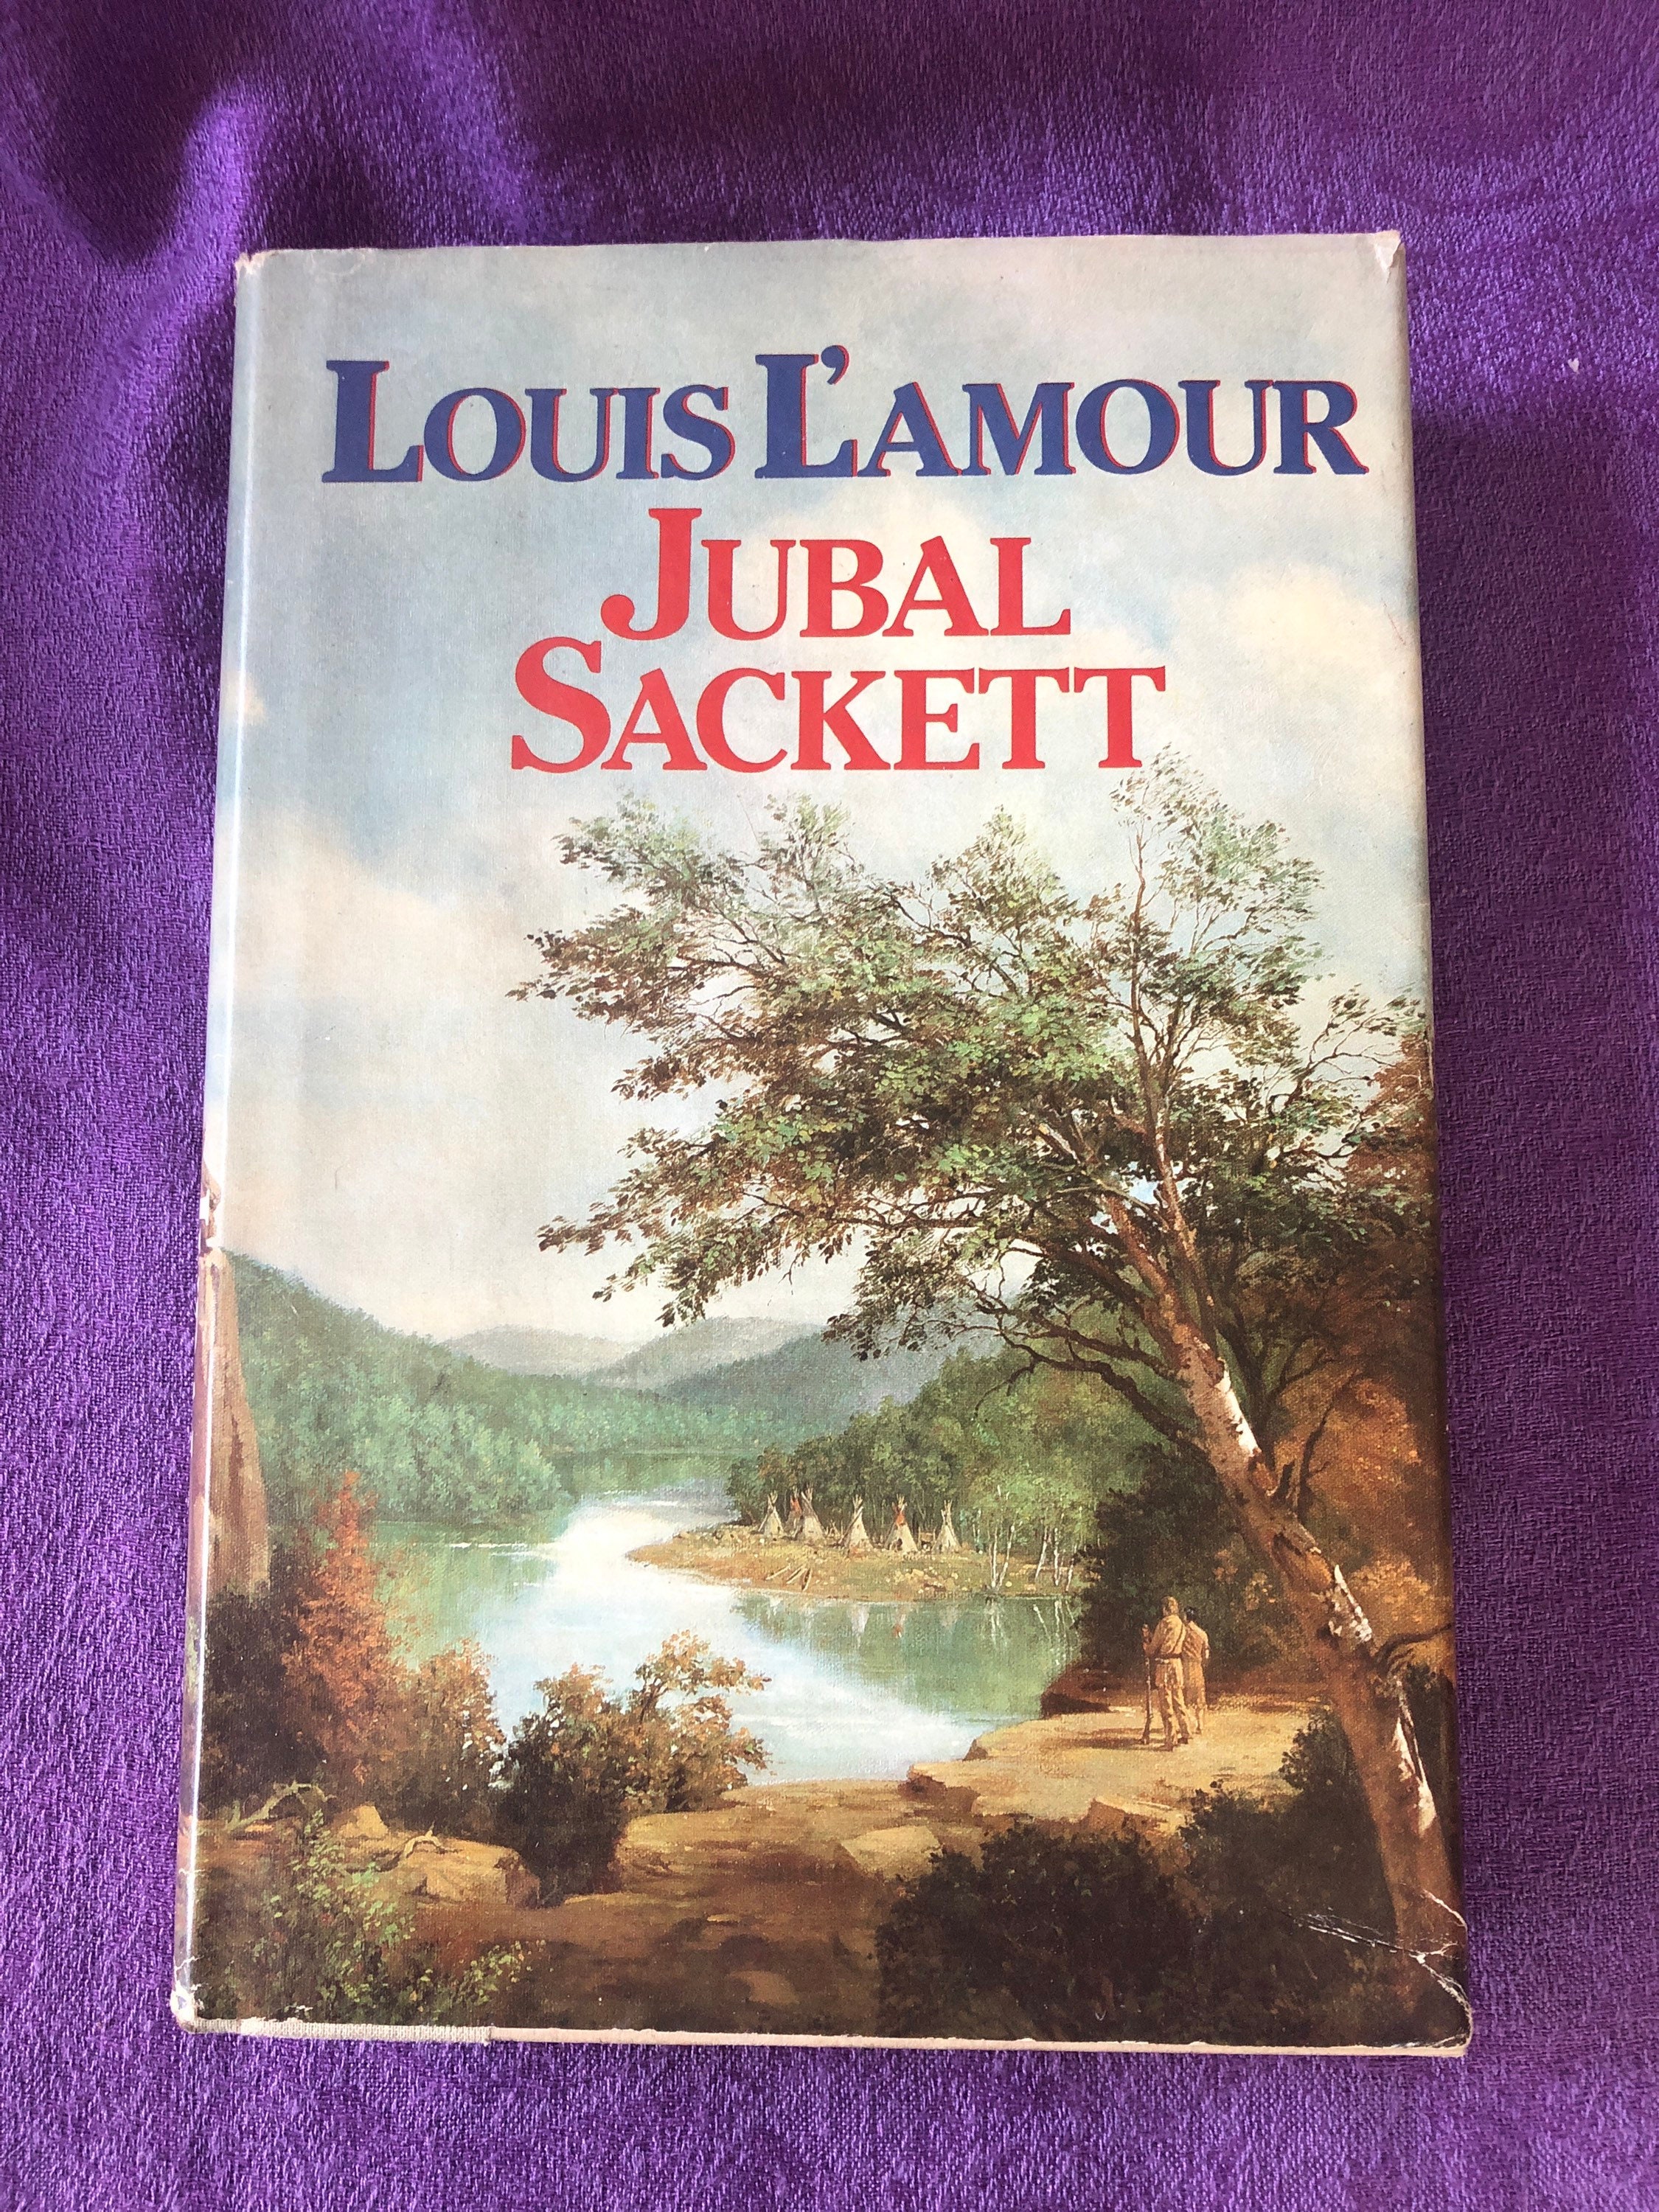 Assorted Louis L'Amour Novels - Paperback, Not all titles shown